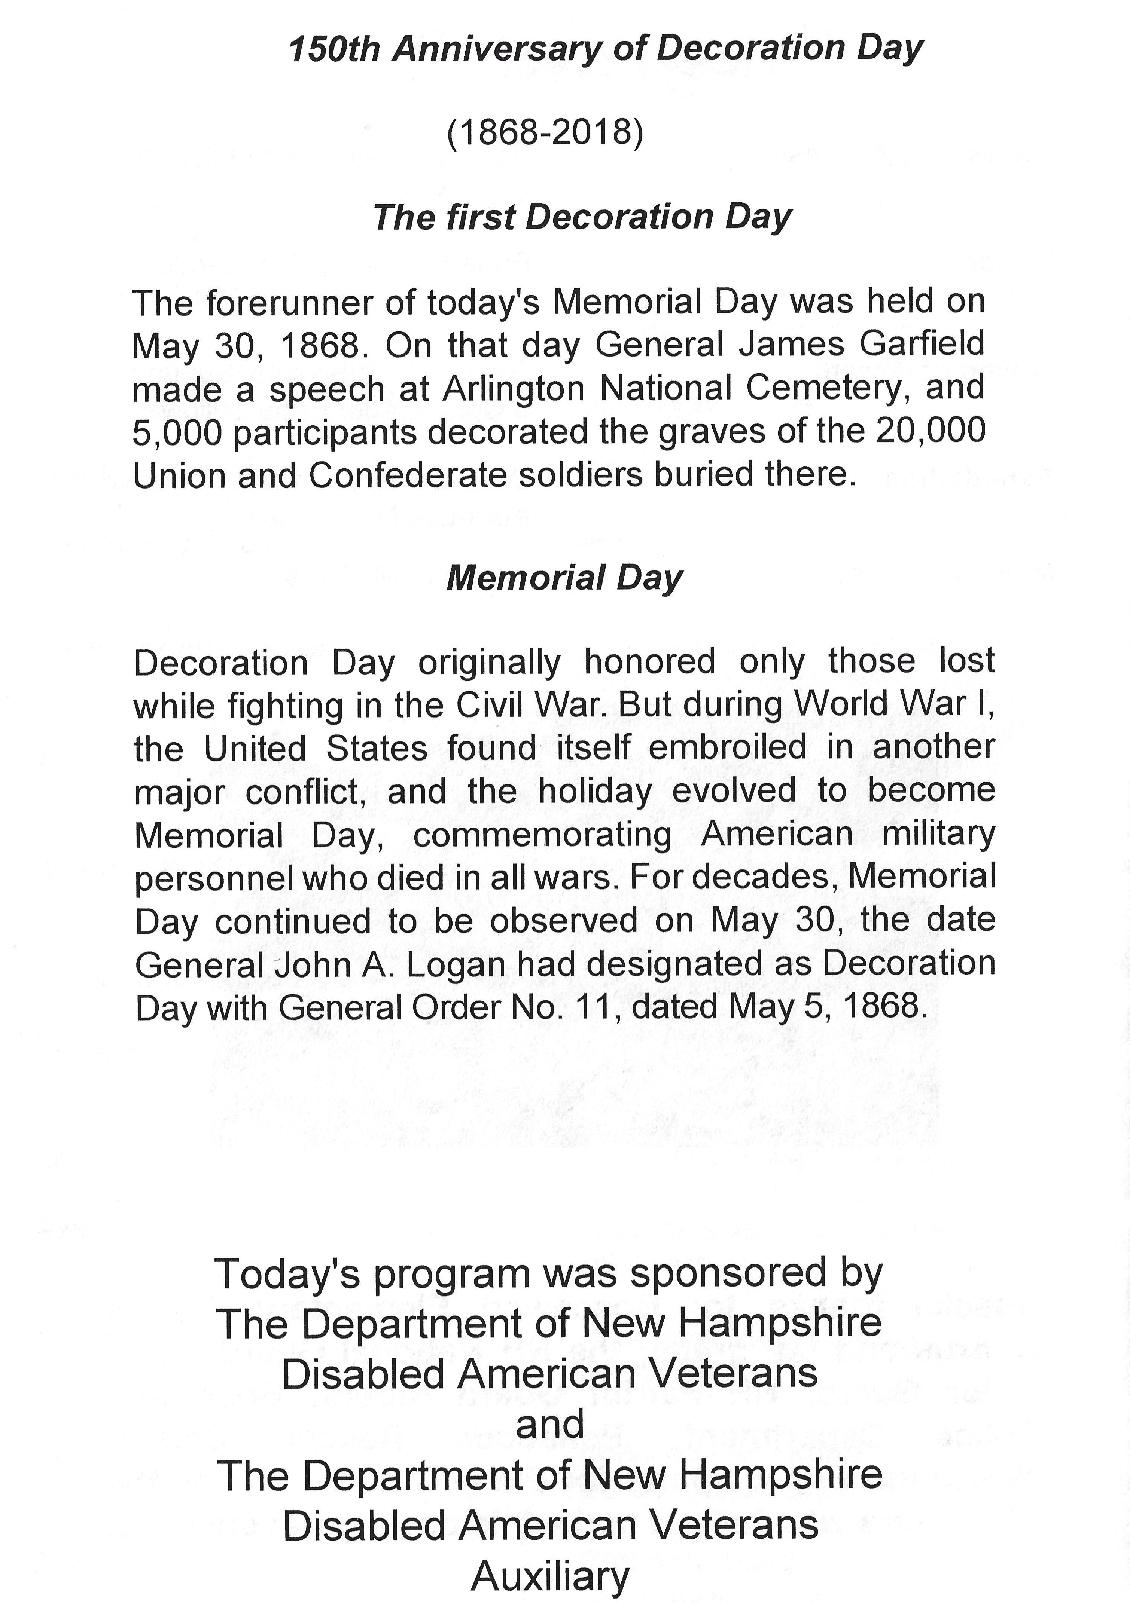 Memorial Day Program at the NH State Veterans Cemetery May 30 2018